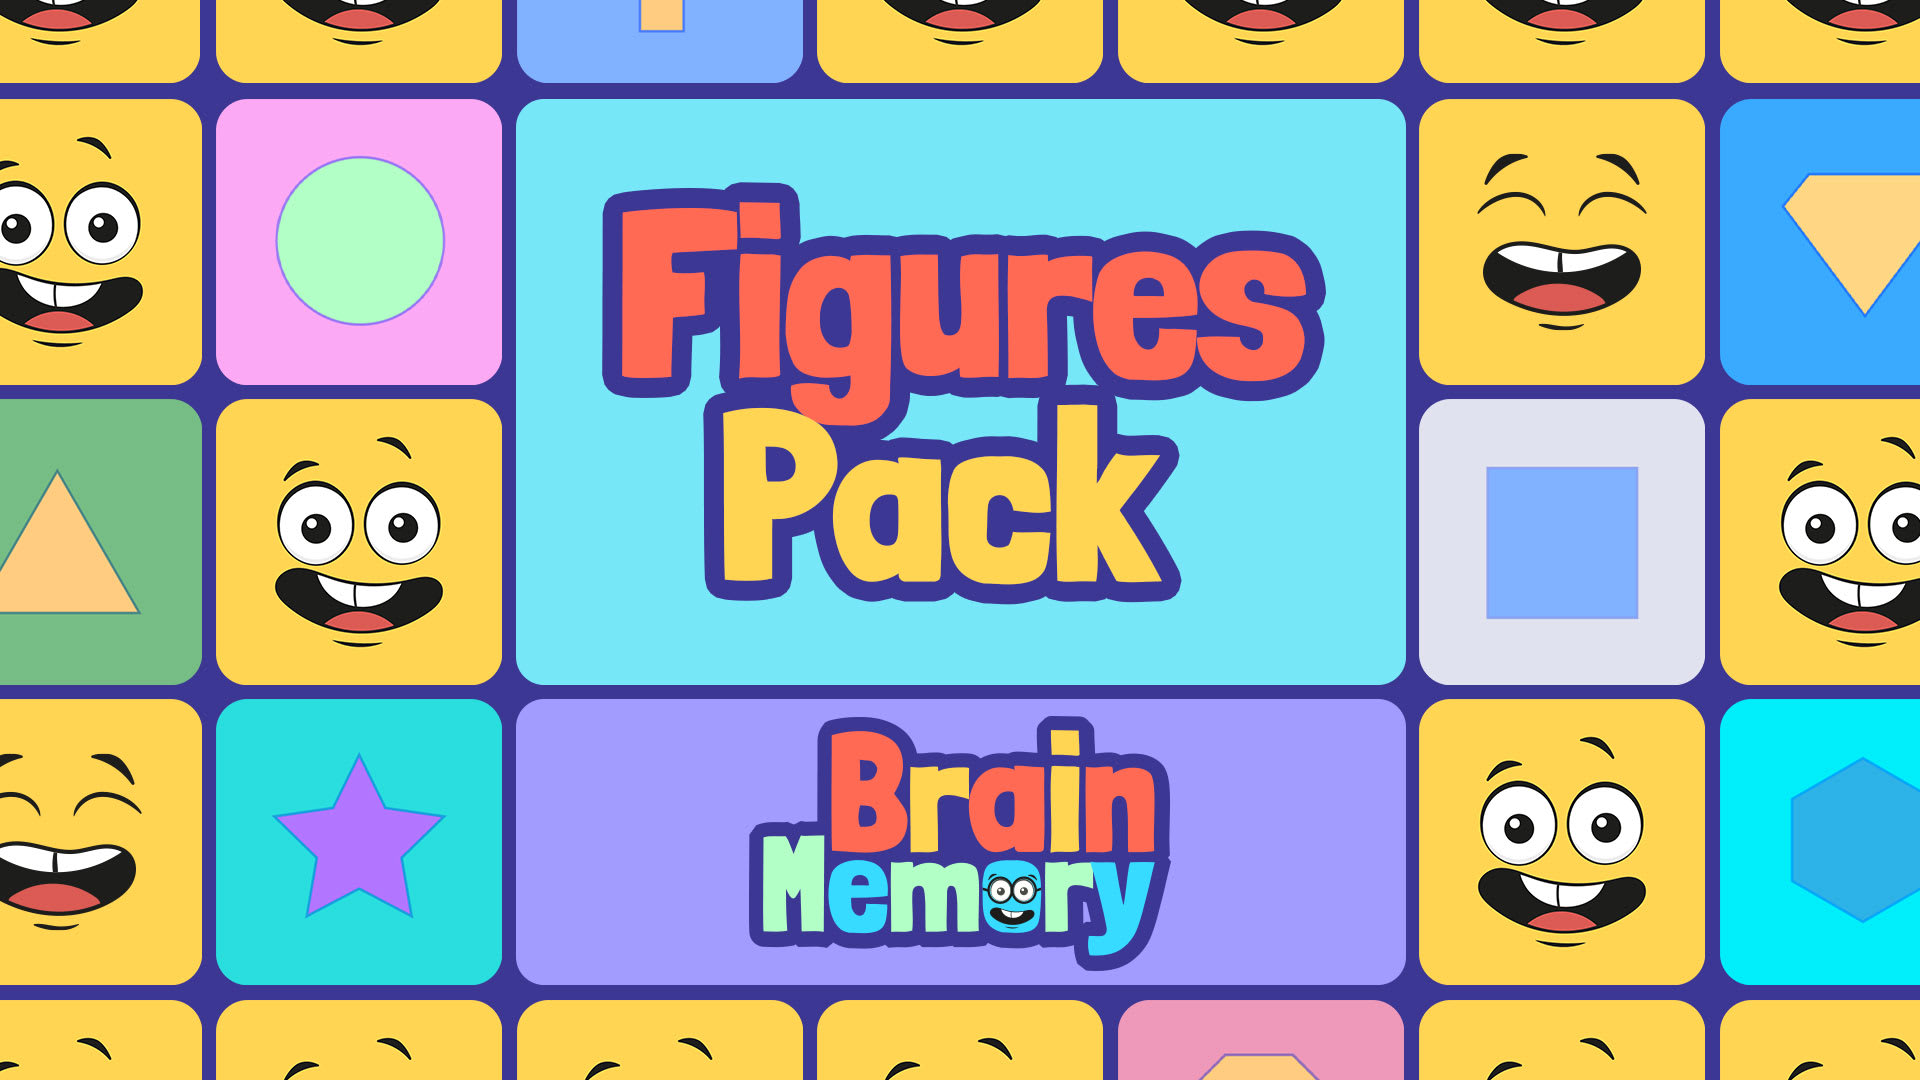 Figures Pack 1